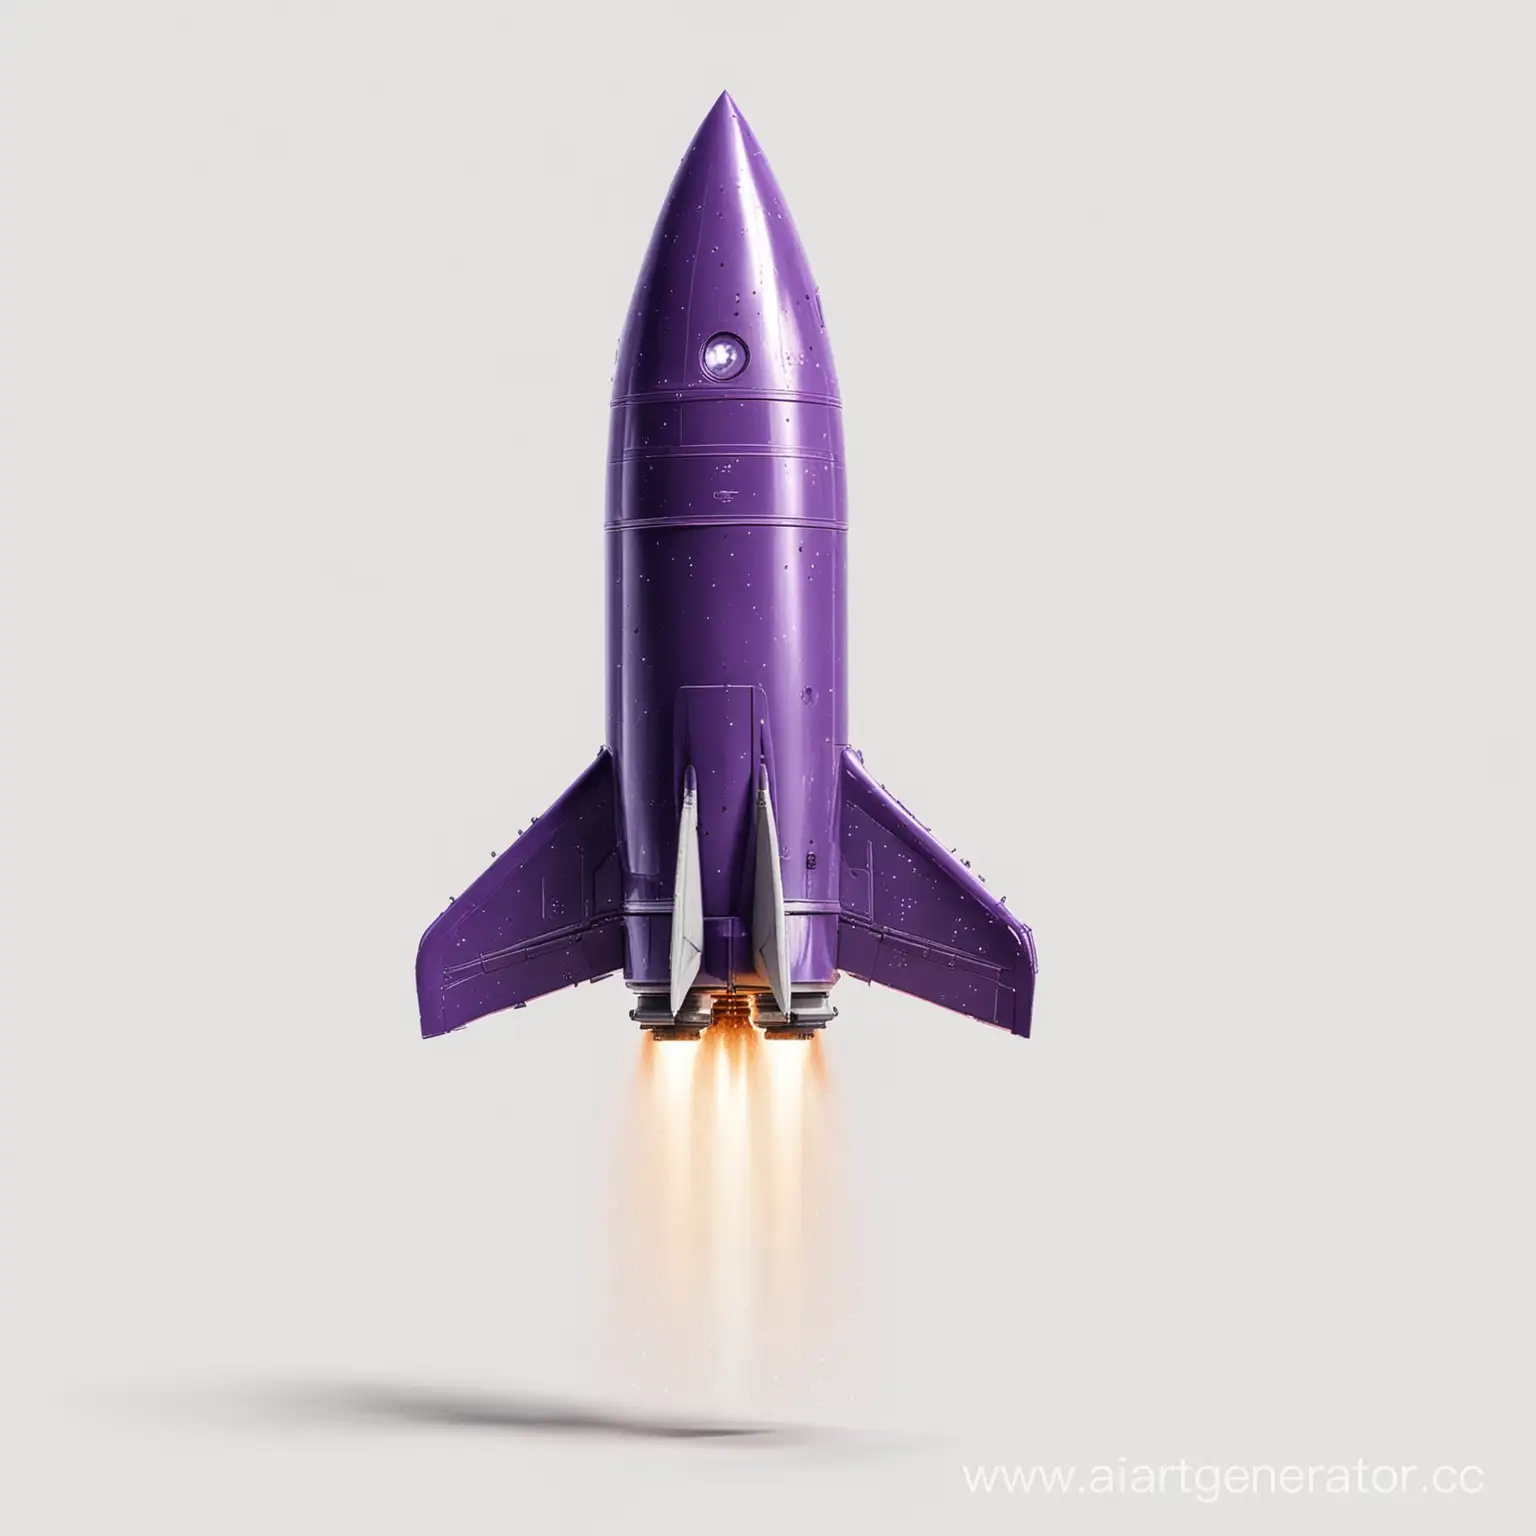 Vibrant-Purple-Rocket-Soaring-in-a-Clean-White-Space